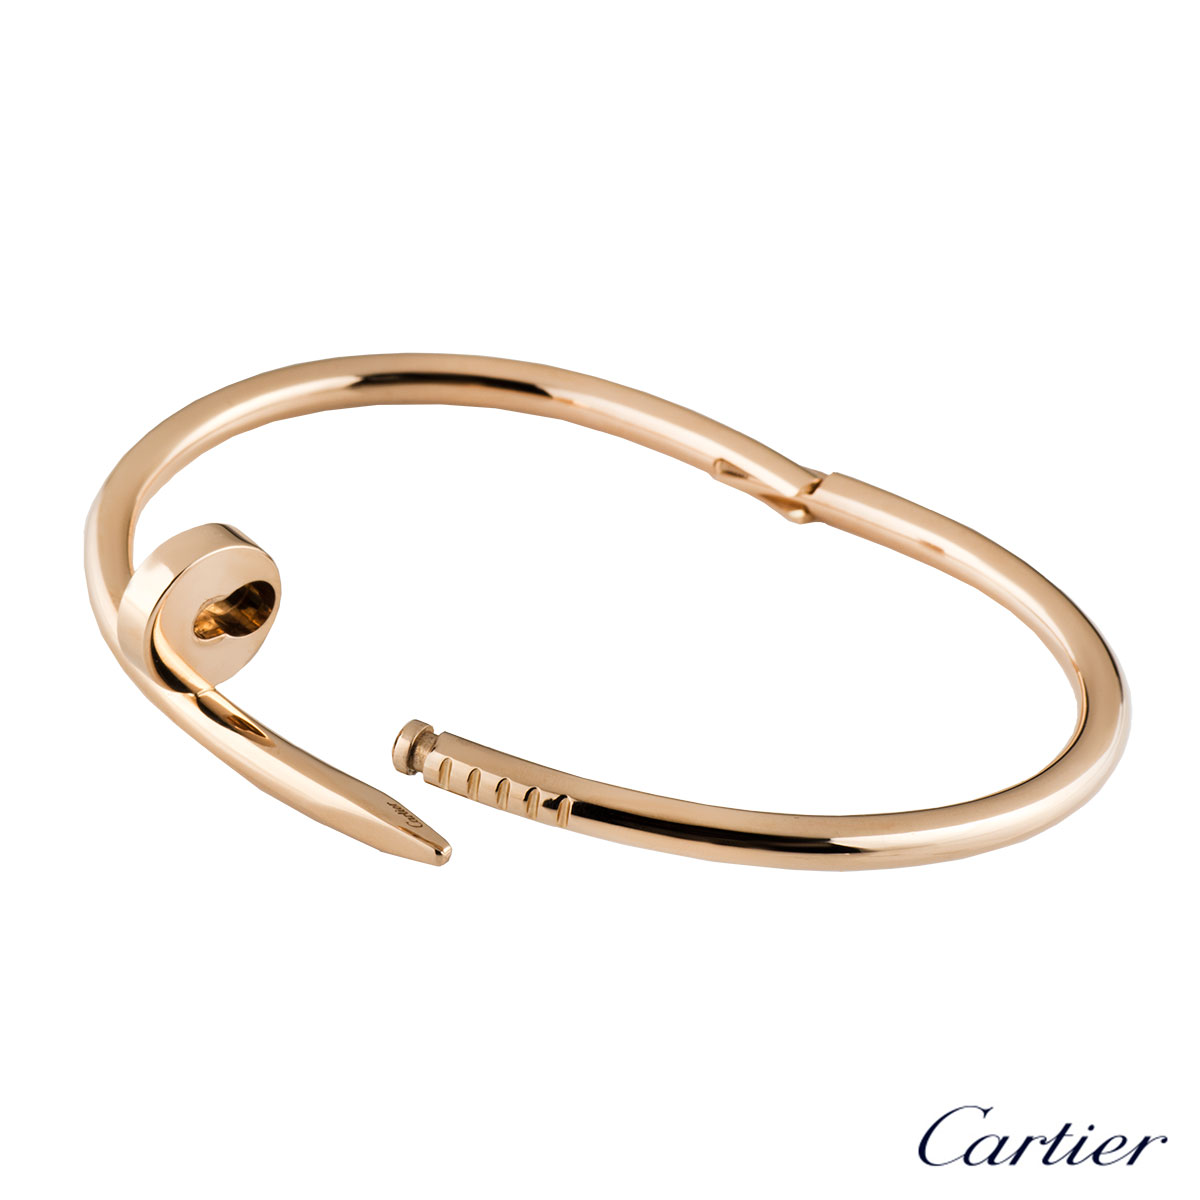 cartier nail bangle how to open